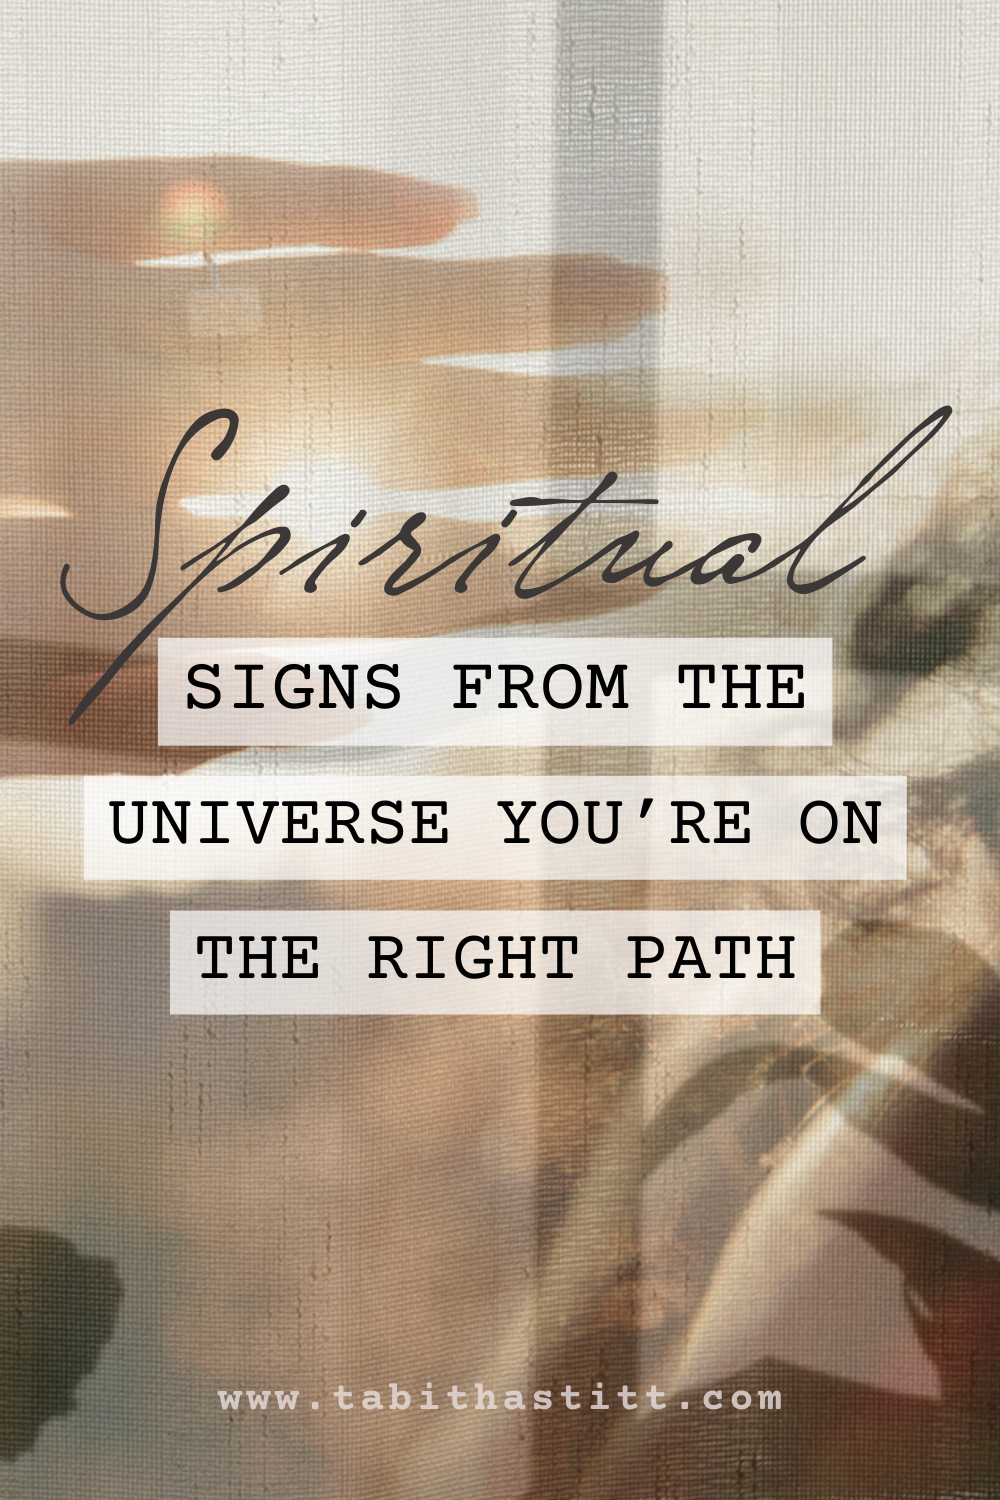 Spiritual Signs from The Universe You Are On The Right Path with the sun for illuminating the path ahead